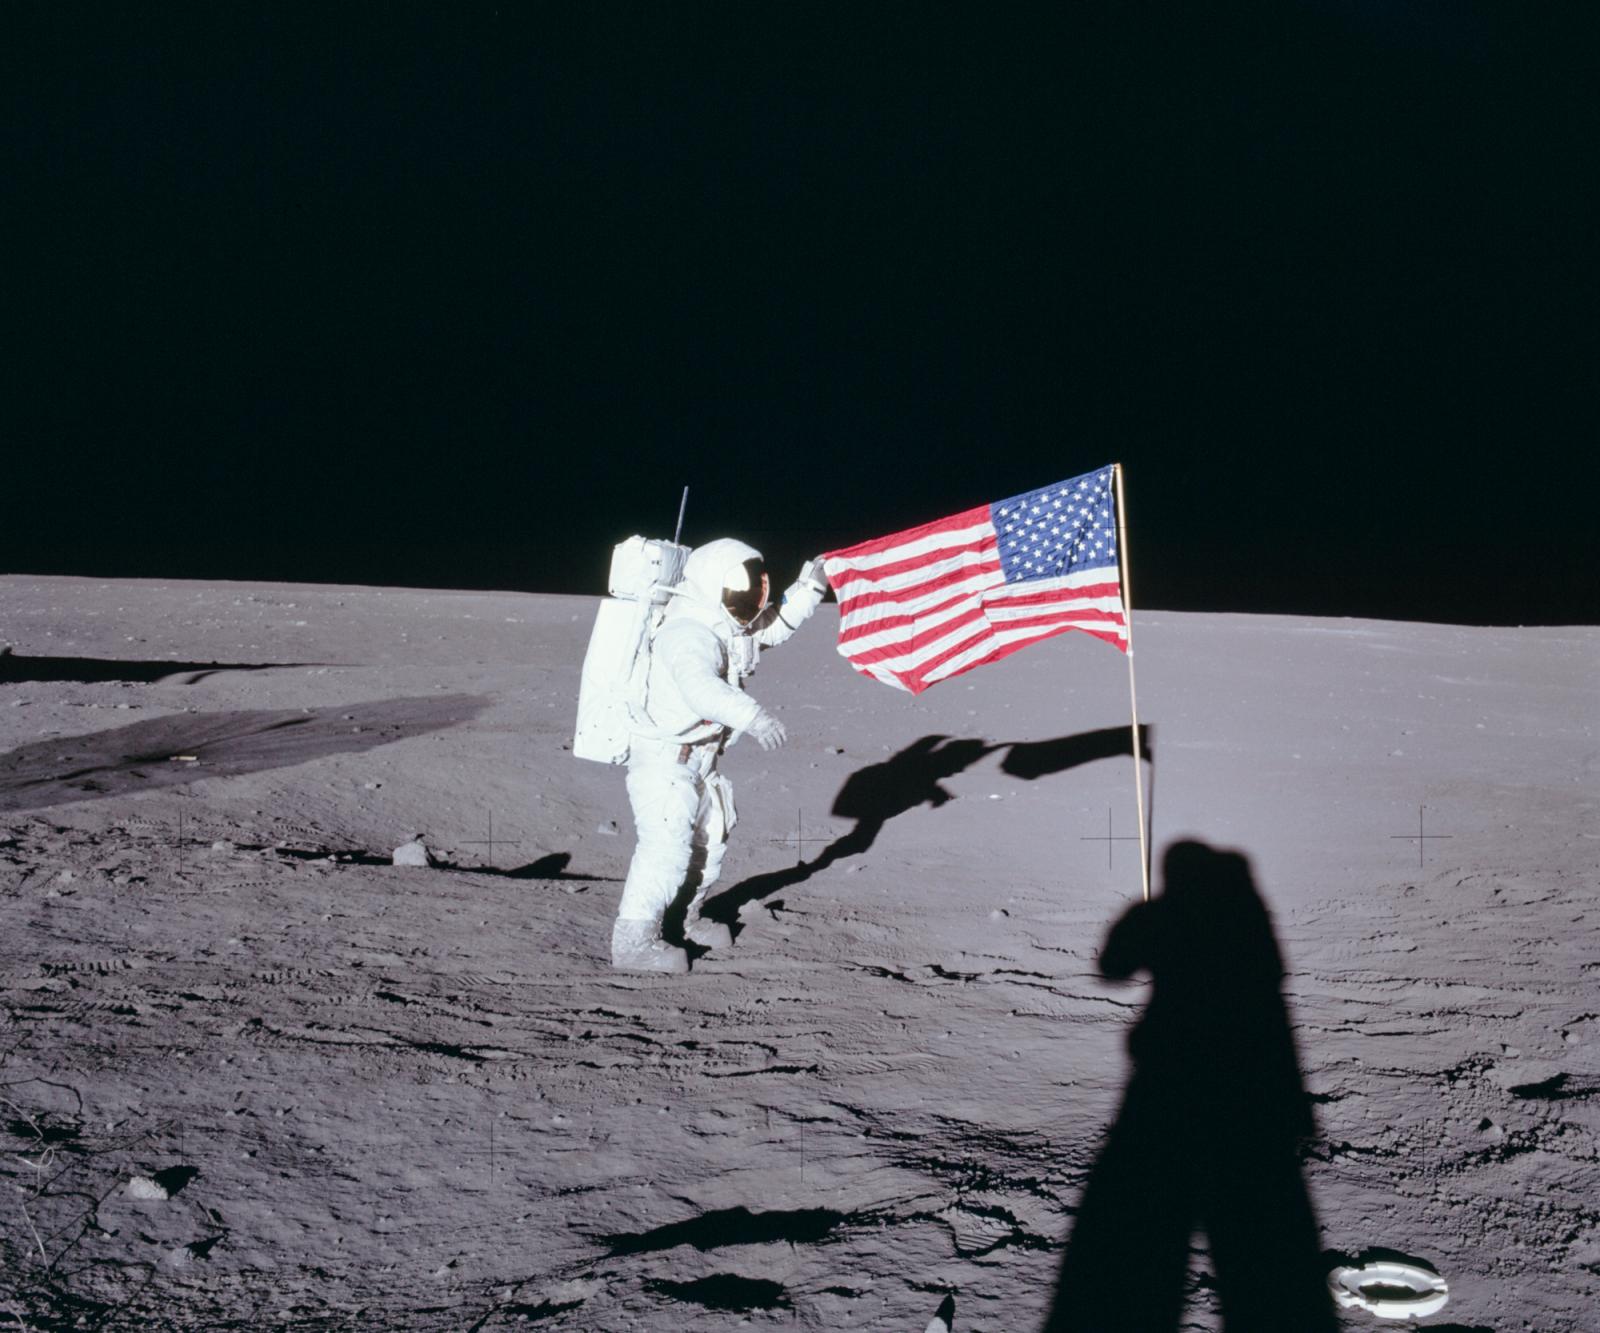 Can You *Actually* Score at Least 83% On This All-Rounded Knowledge Quiz? Moon landing